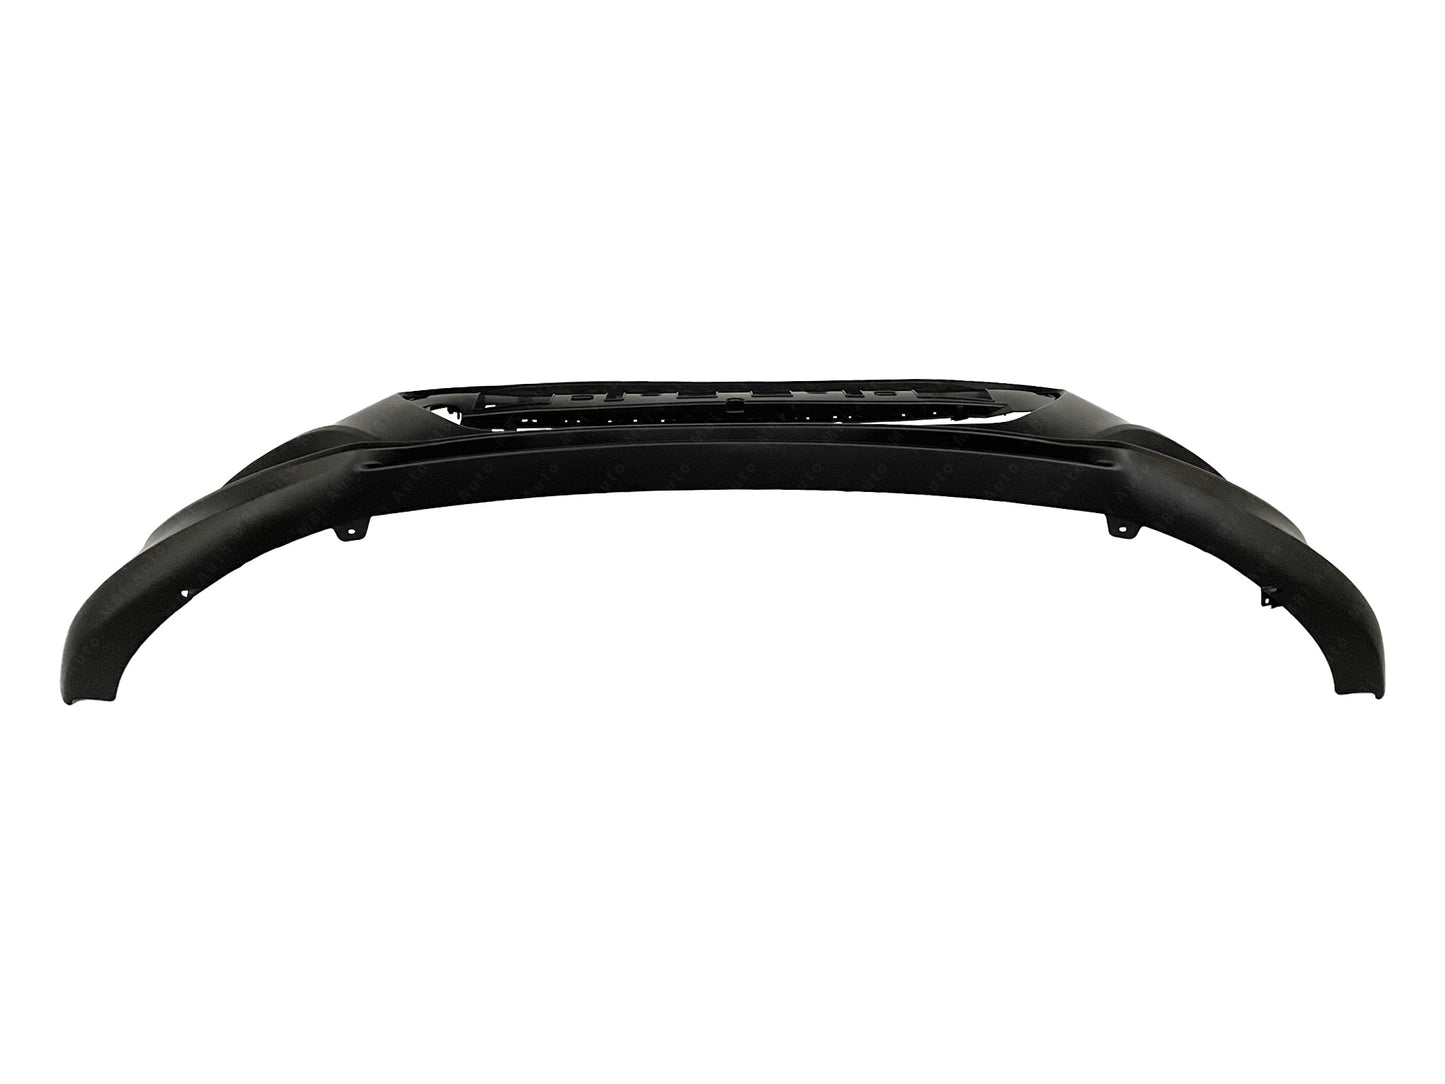 Hyundai Genesis Coupe 2013 - 2016 Front Bumper Cover 13 - 16 HY1000197 Bumper-King